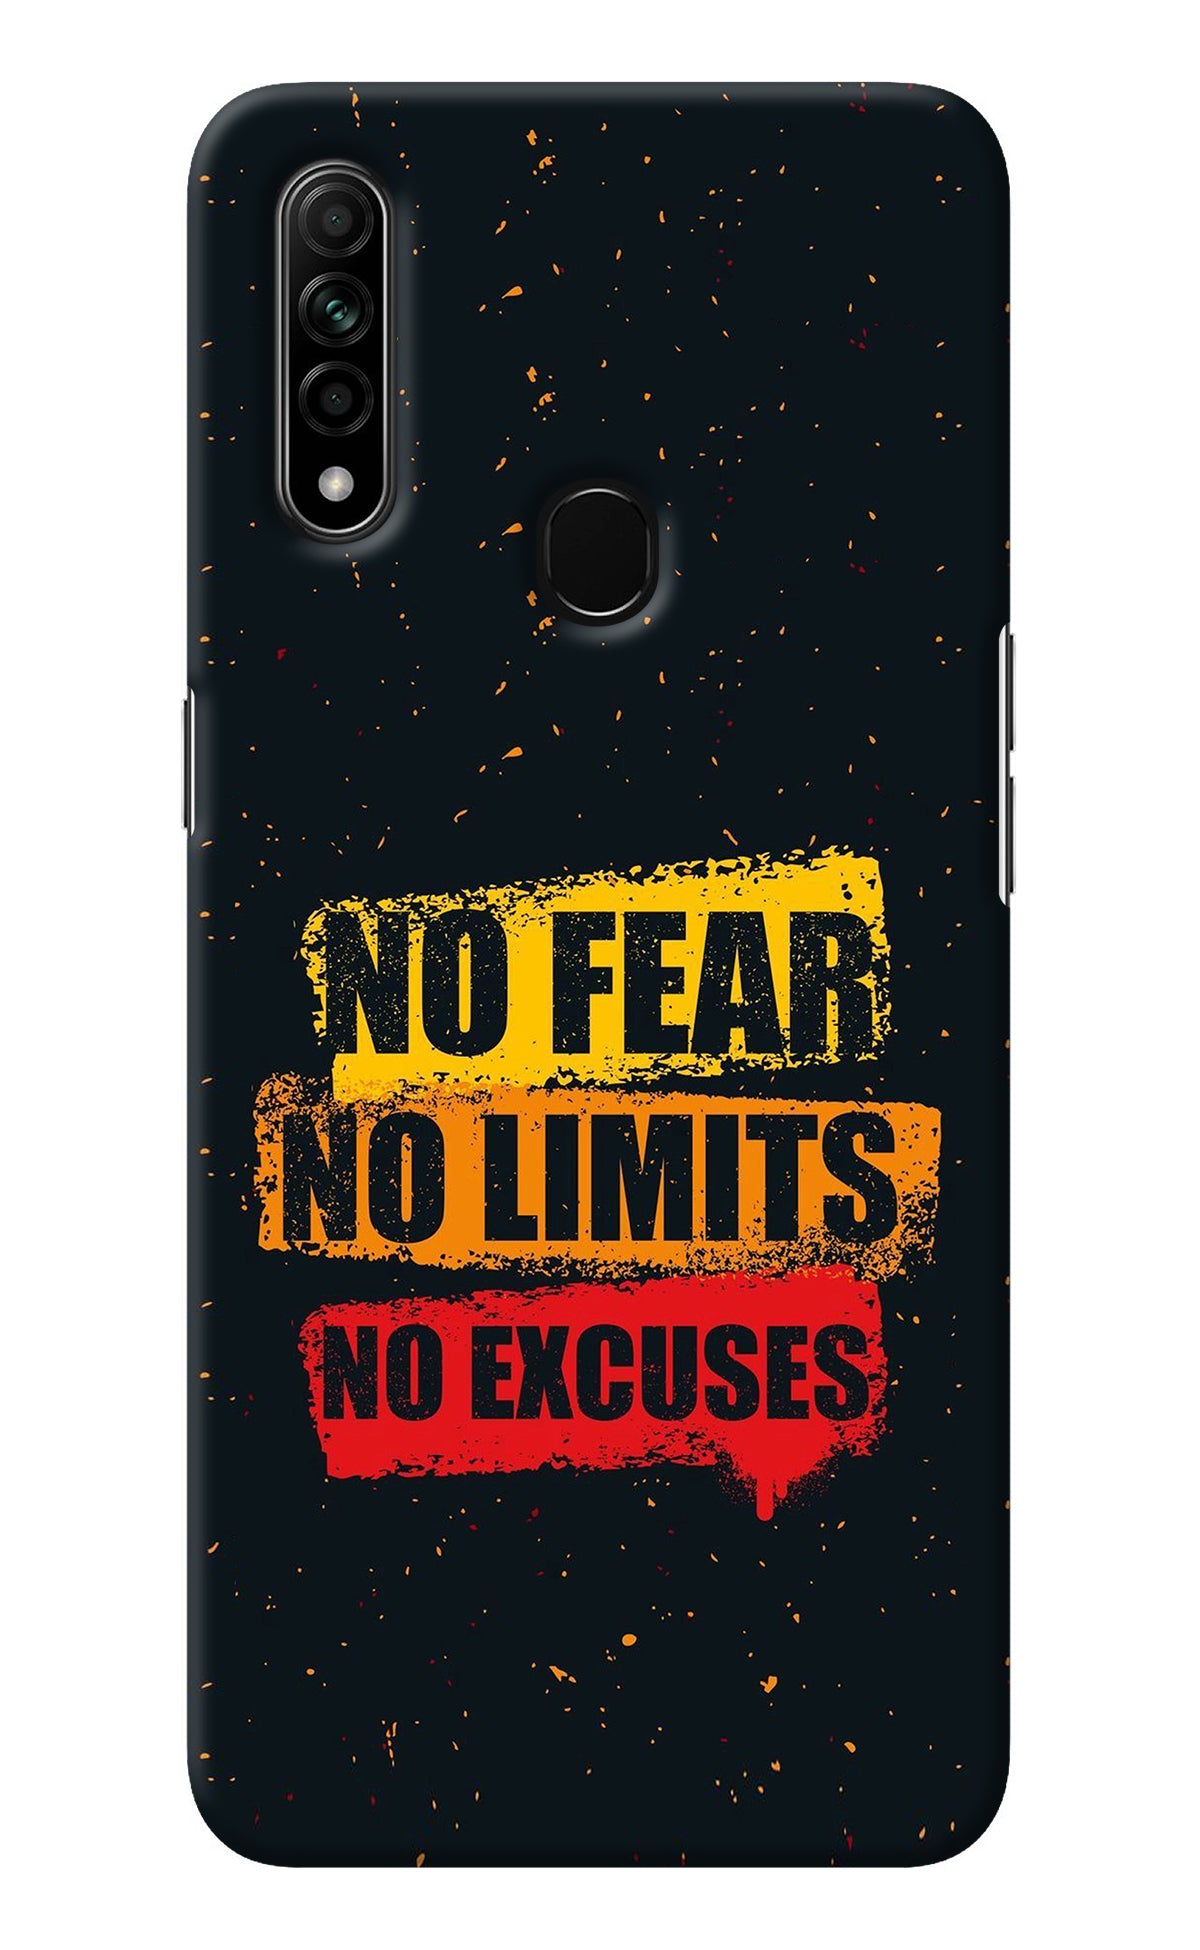 No Fear No Limits No Excuse Oppo A31 Back Cover